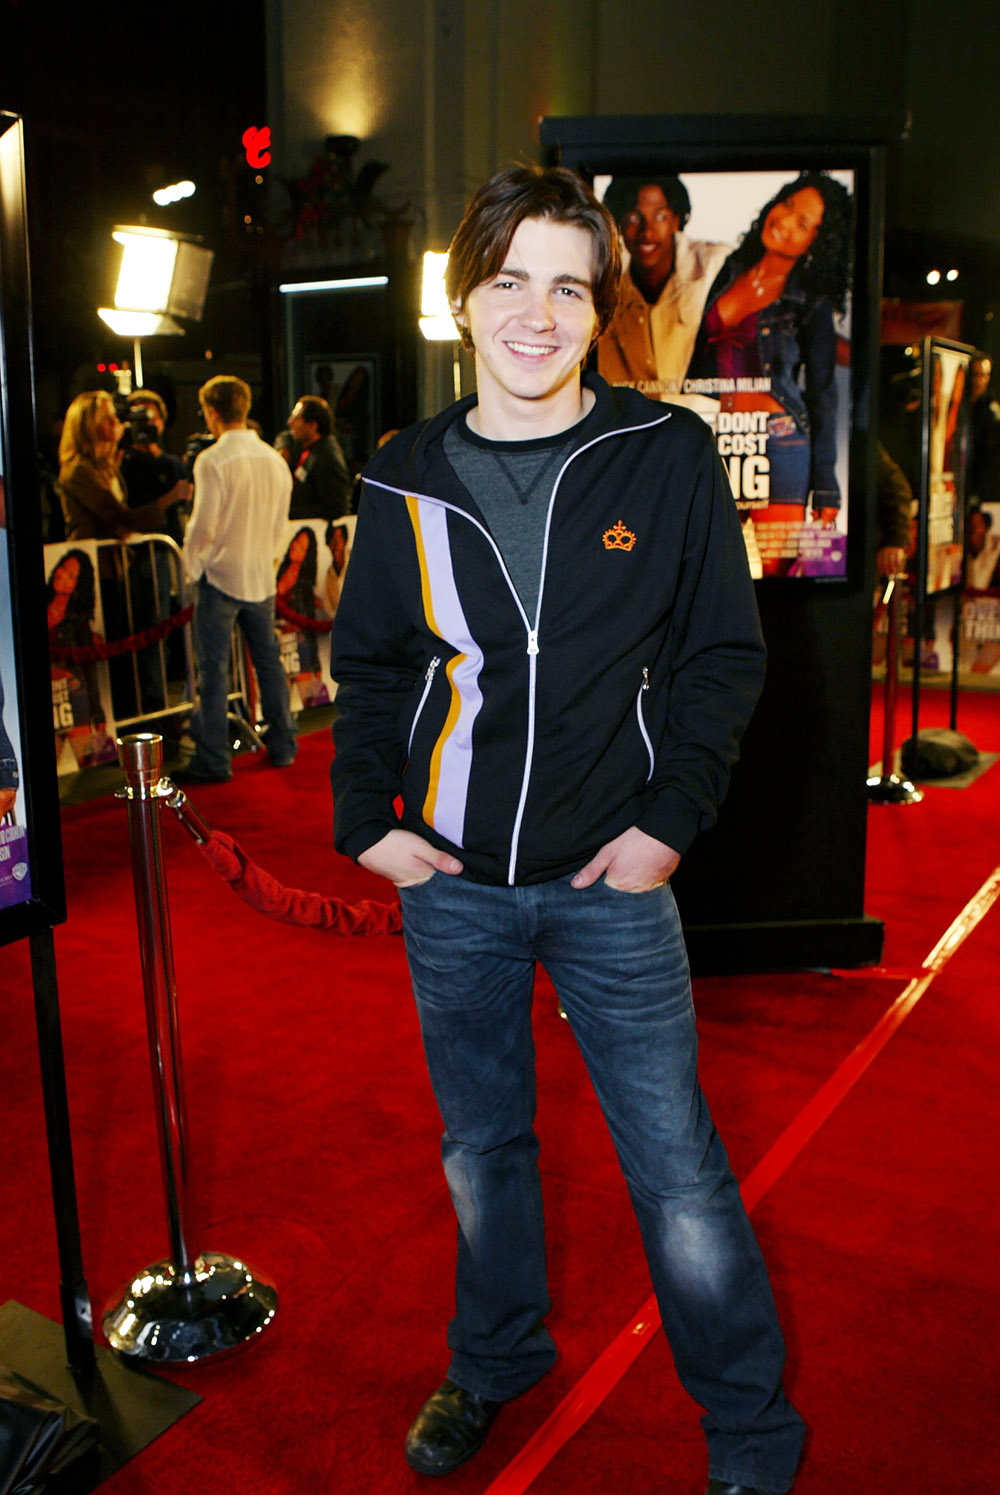 Drake Bell 'LOVE DONT COST A THING' FILM PREMIERE, LOS ANGELES, AMERICA - DECEMBER 10, 2003 December 10, 2003 - Hollywood, CA. Drake Bell . Warner Bros . Pictures presents the world premiere of LOVE DON'T COST A THING at Grauman's Chinese Theatre. Photo by: Alex Berliner®Berliner Studio/BEImages